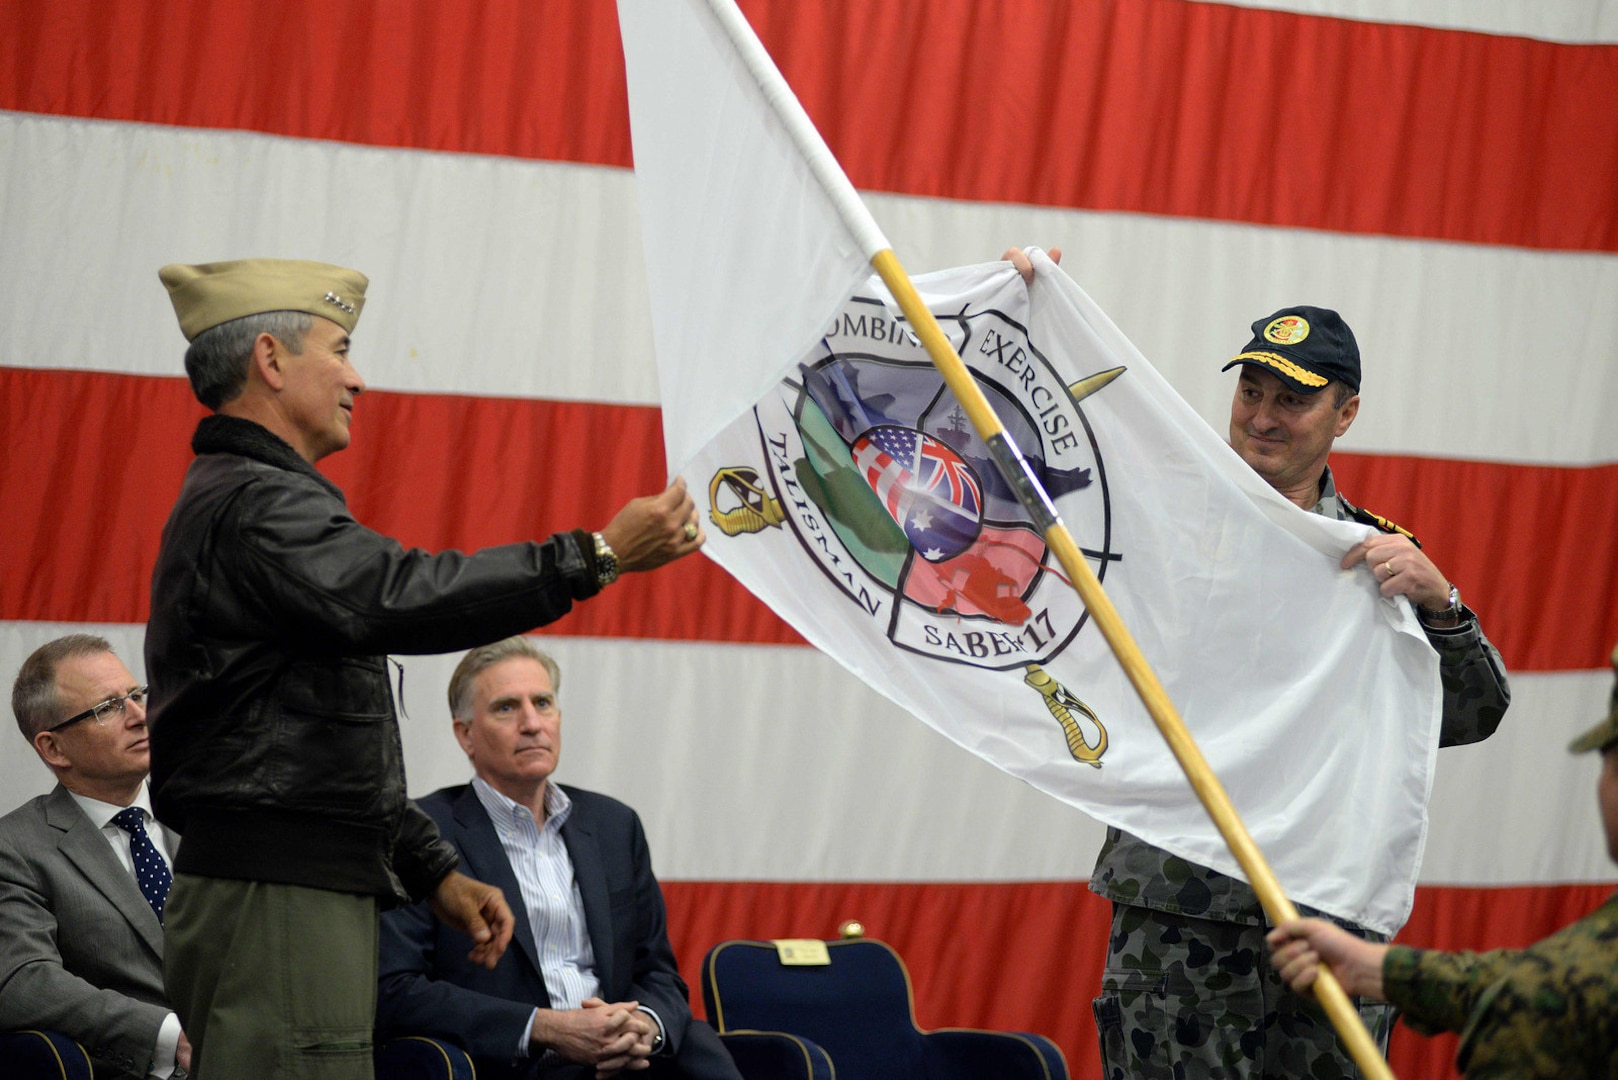 Adm. Harry B. Harris, commander of U.S. Pacific Command, left, and Royal Australian Navy Vice Adm. David Johnston, Australian Defense Force Chief of Joint Operations, unfurl the ceremonial Talisman Saber 2017 flag during the Talisman Saber 2017 opening ceremony aboard the amphibious assault ship USS Bonhomme Richard (LHD 6), June 29, 2017. Talisman Saber is a biennial U.S.-Australia bilateral military exercise that combines a field training exercise and command post exercise to strengthen interoperability and response capabilities to uphold the tenets of the U.S.-Australian alliance. 